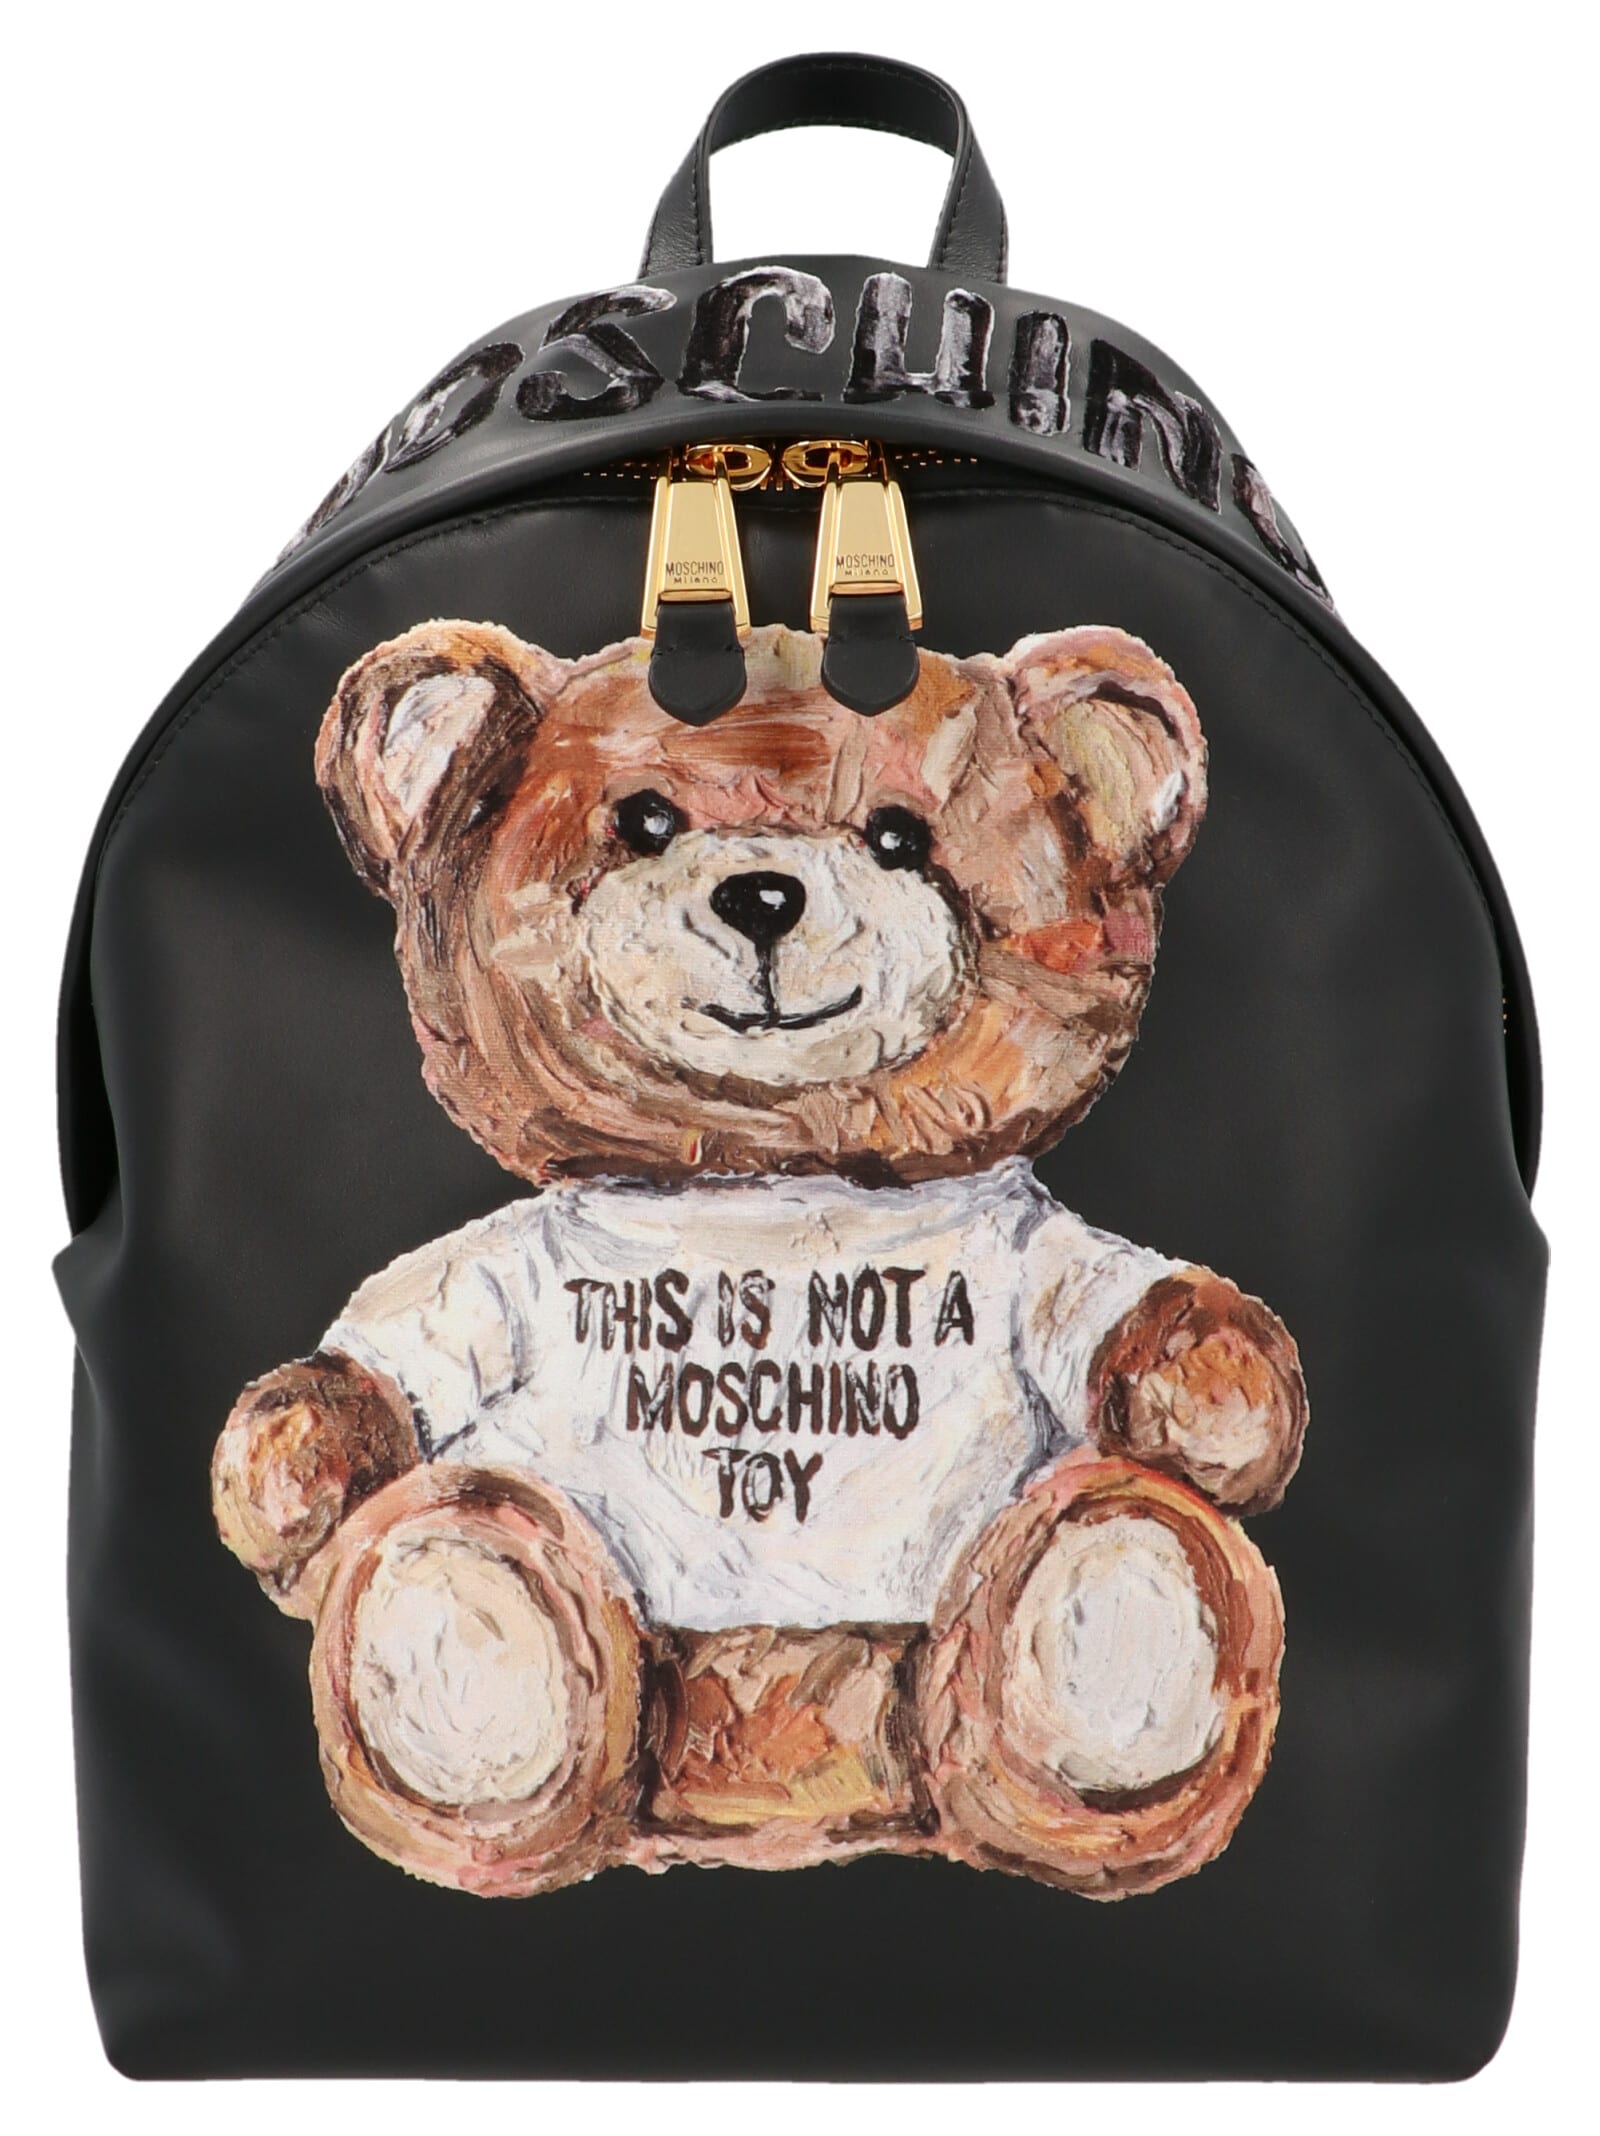 Moschino painted Teddy Bag